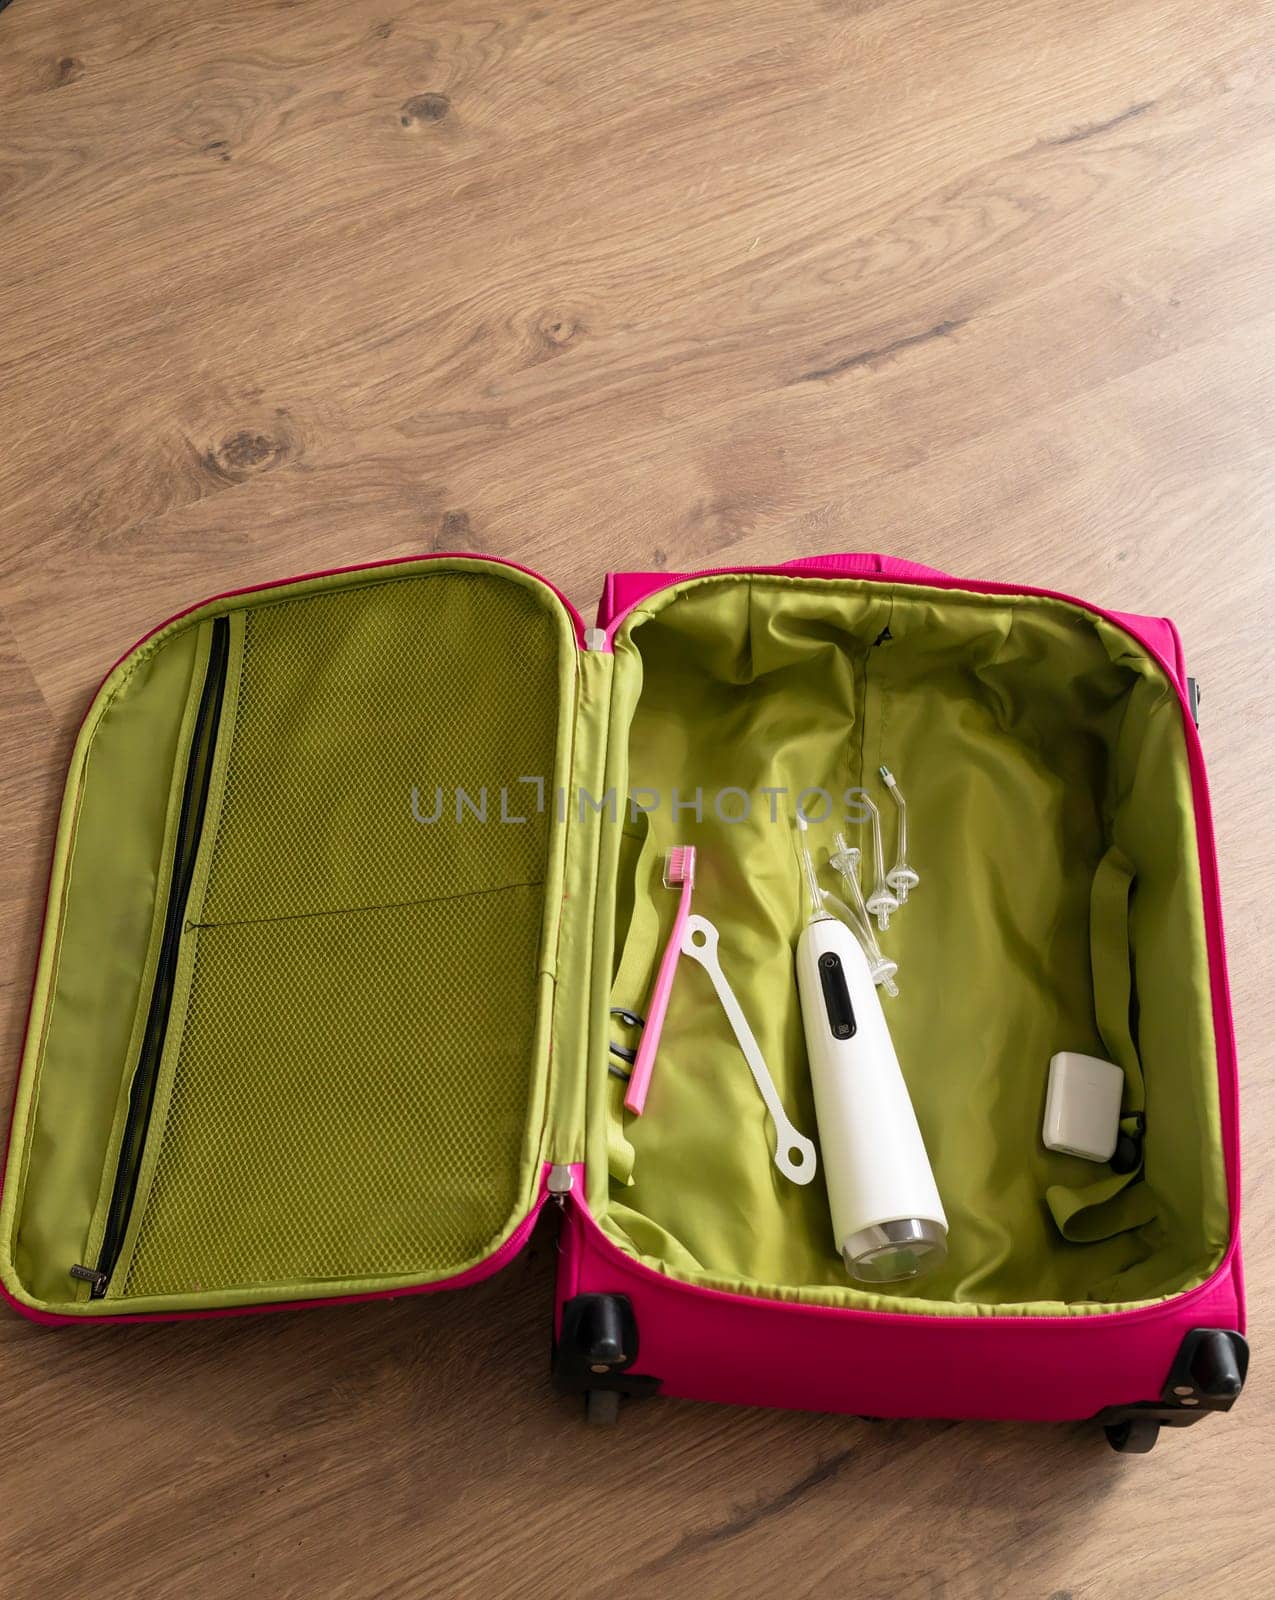 Dental teeth care set in handbag, travel concept. Water teeth irrigator with nozzle pack, toothbrush, floss in luggage on wooden floor. Home dental care device. Vertical plane by netatsi